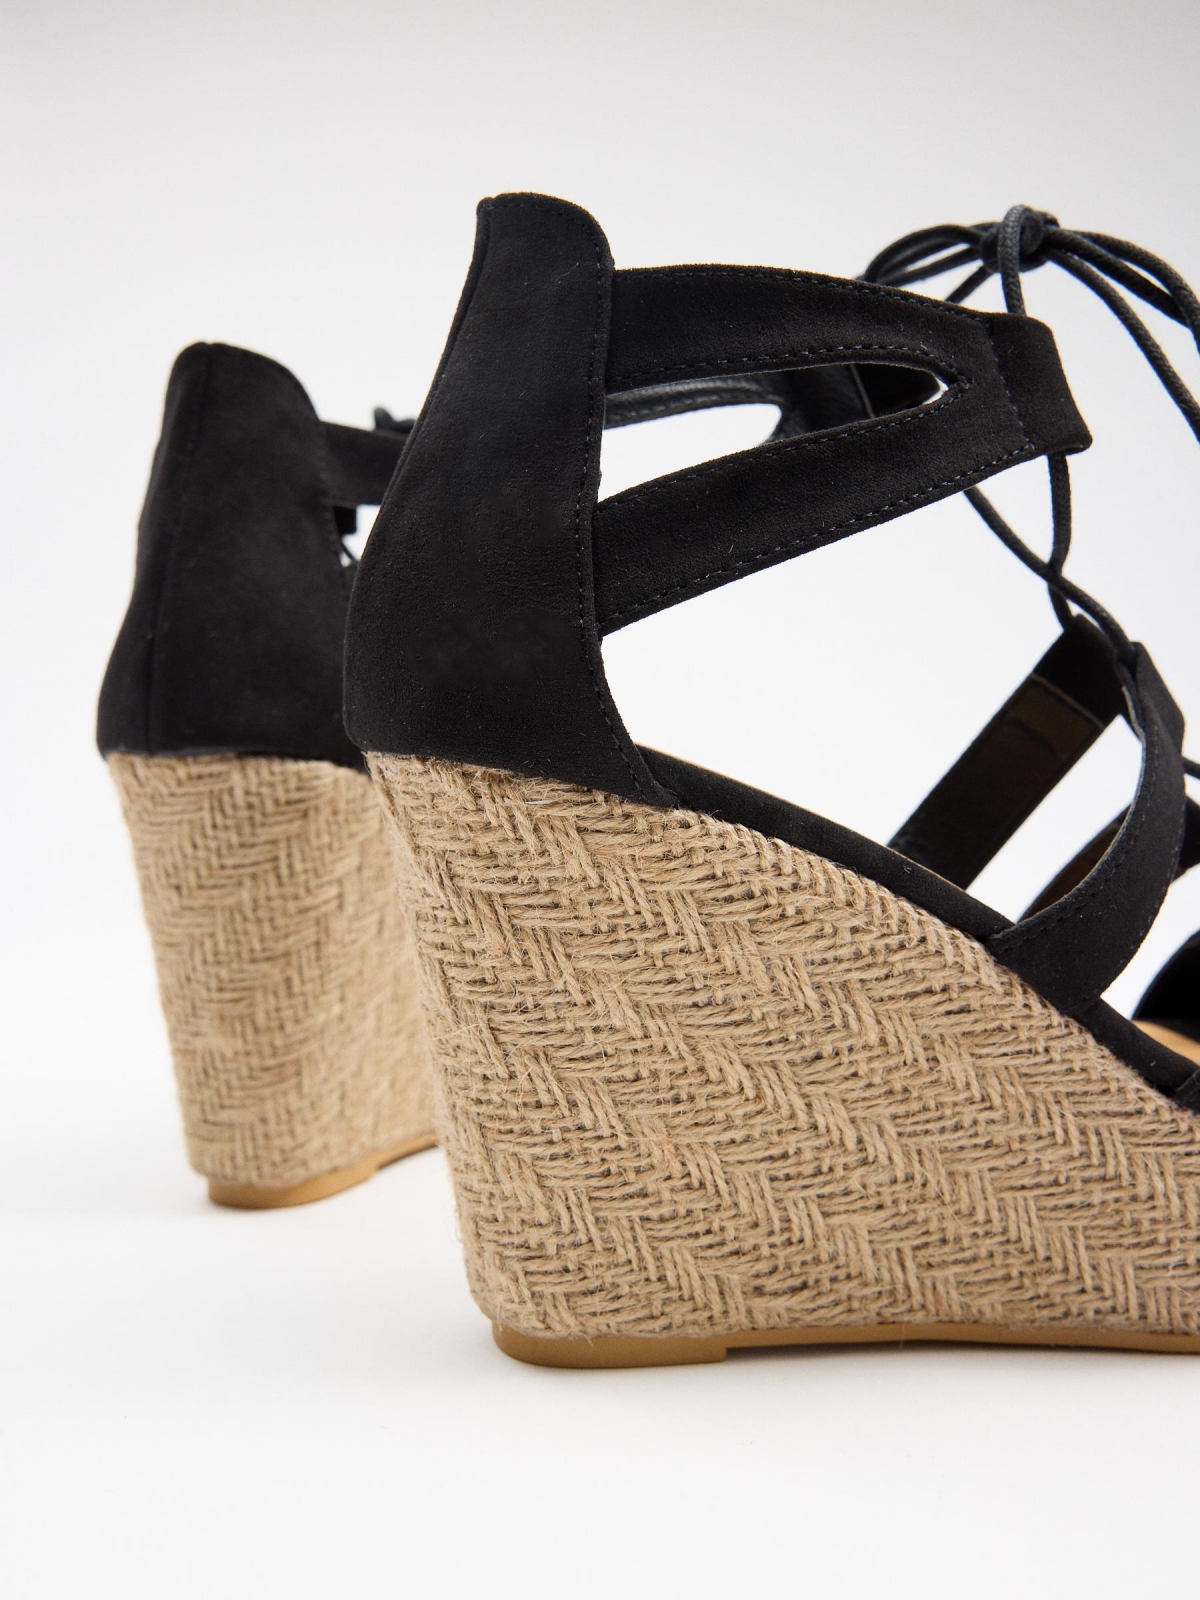 Wedges with lace-up straps black/beige detail view